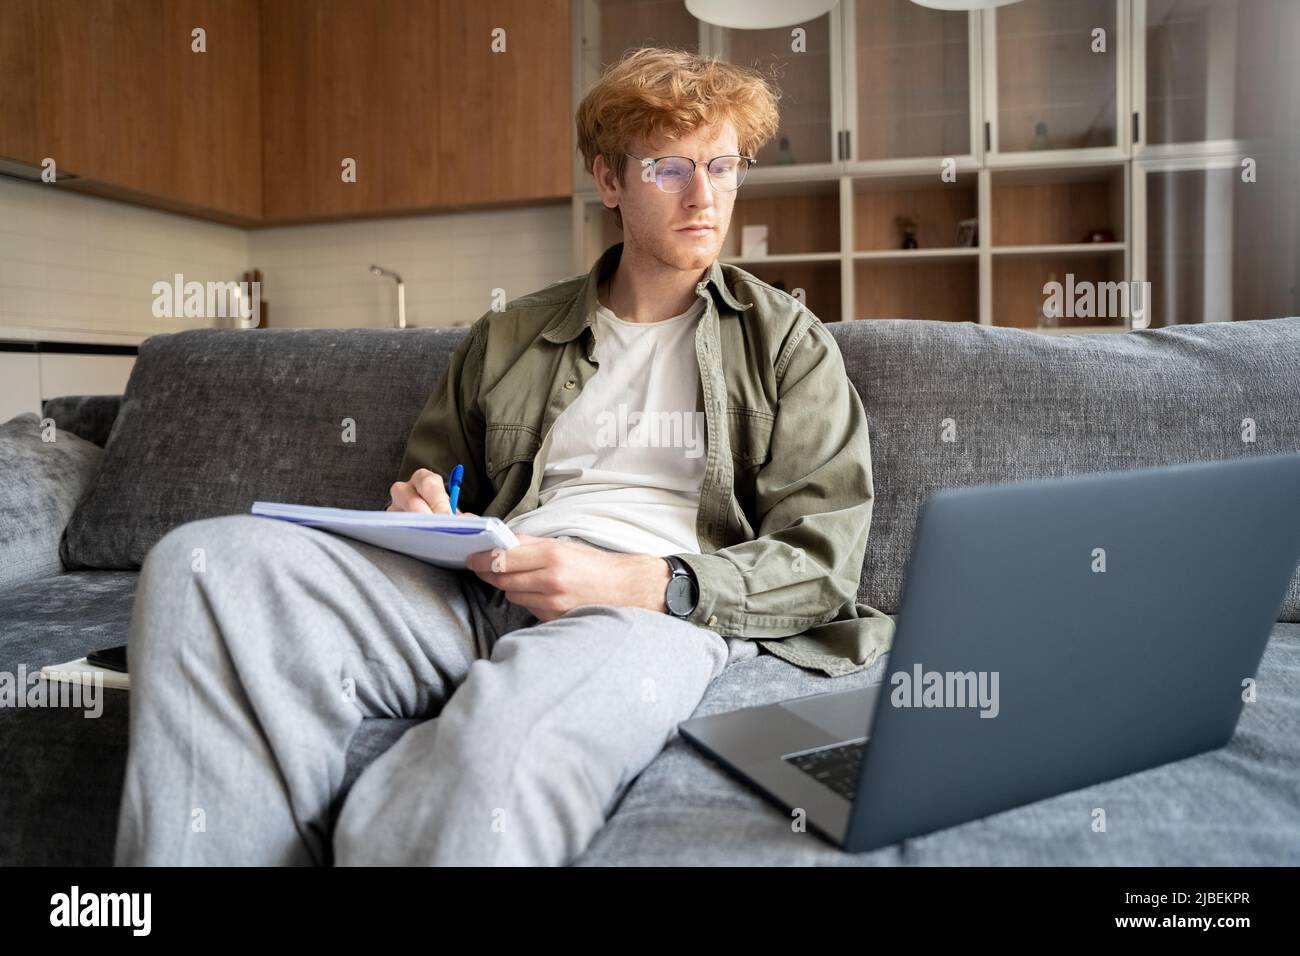 Focused young ginger irish man watching webinar video course writing notes Stock Photo